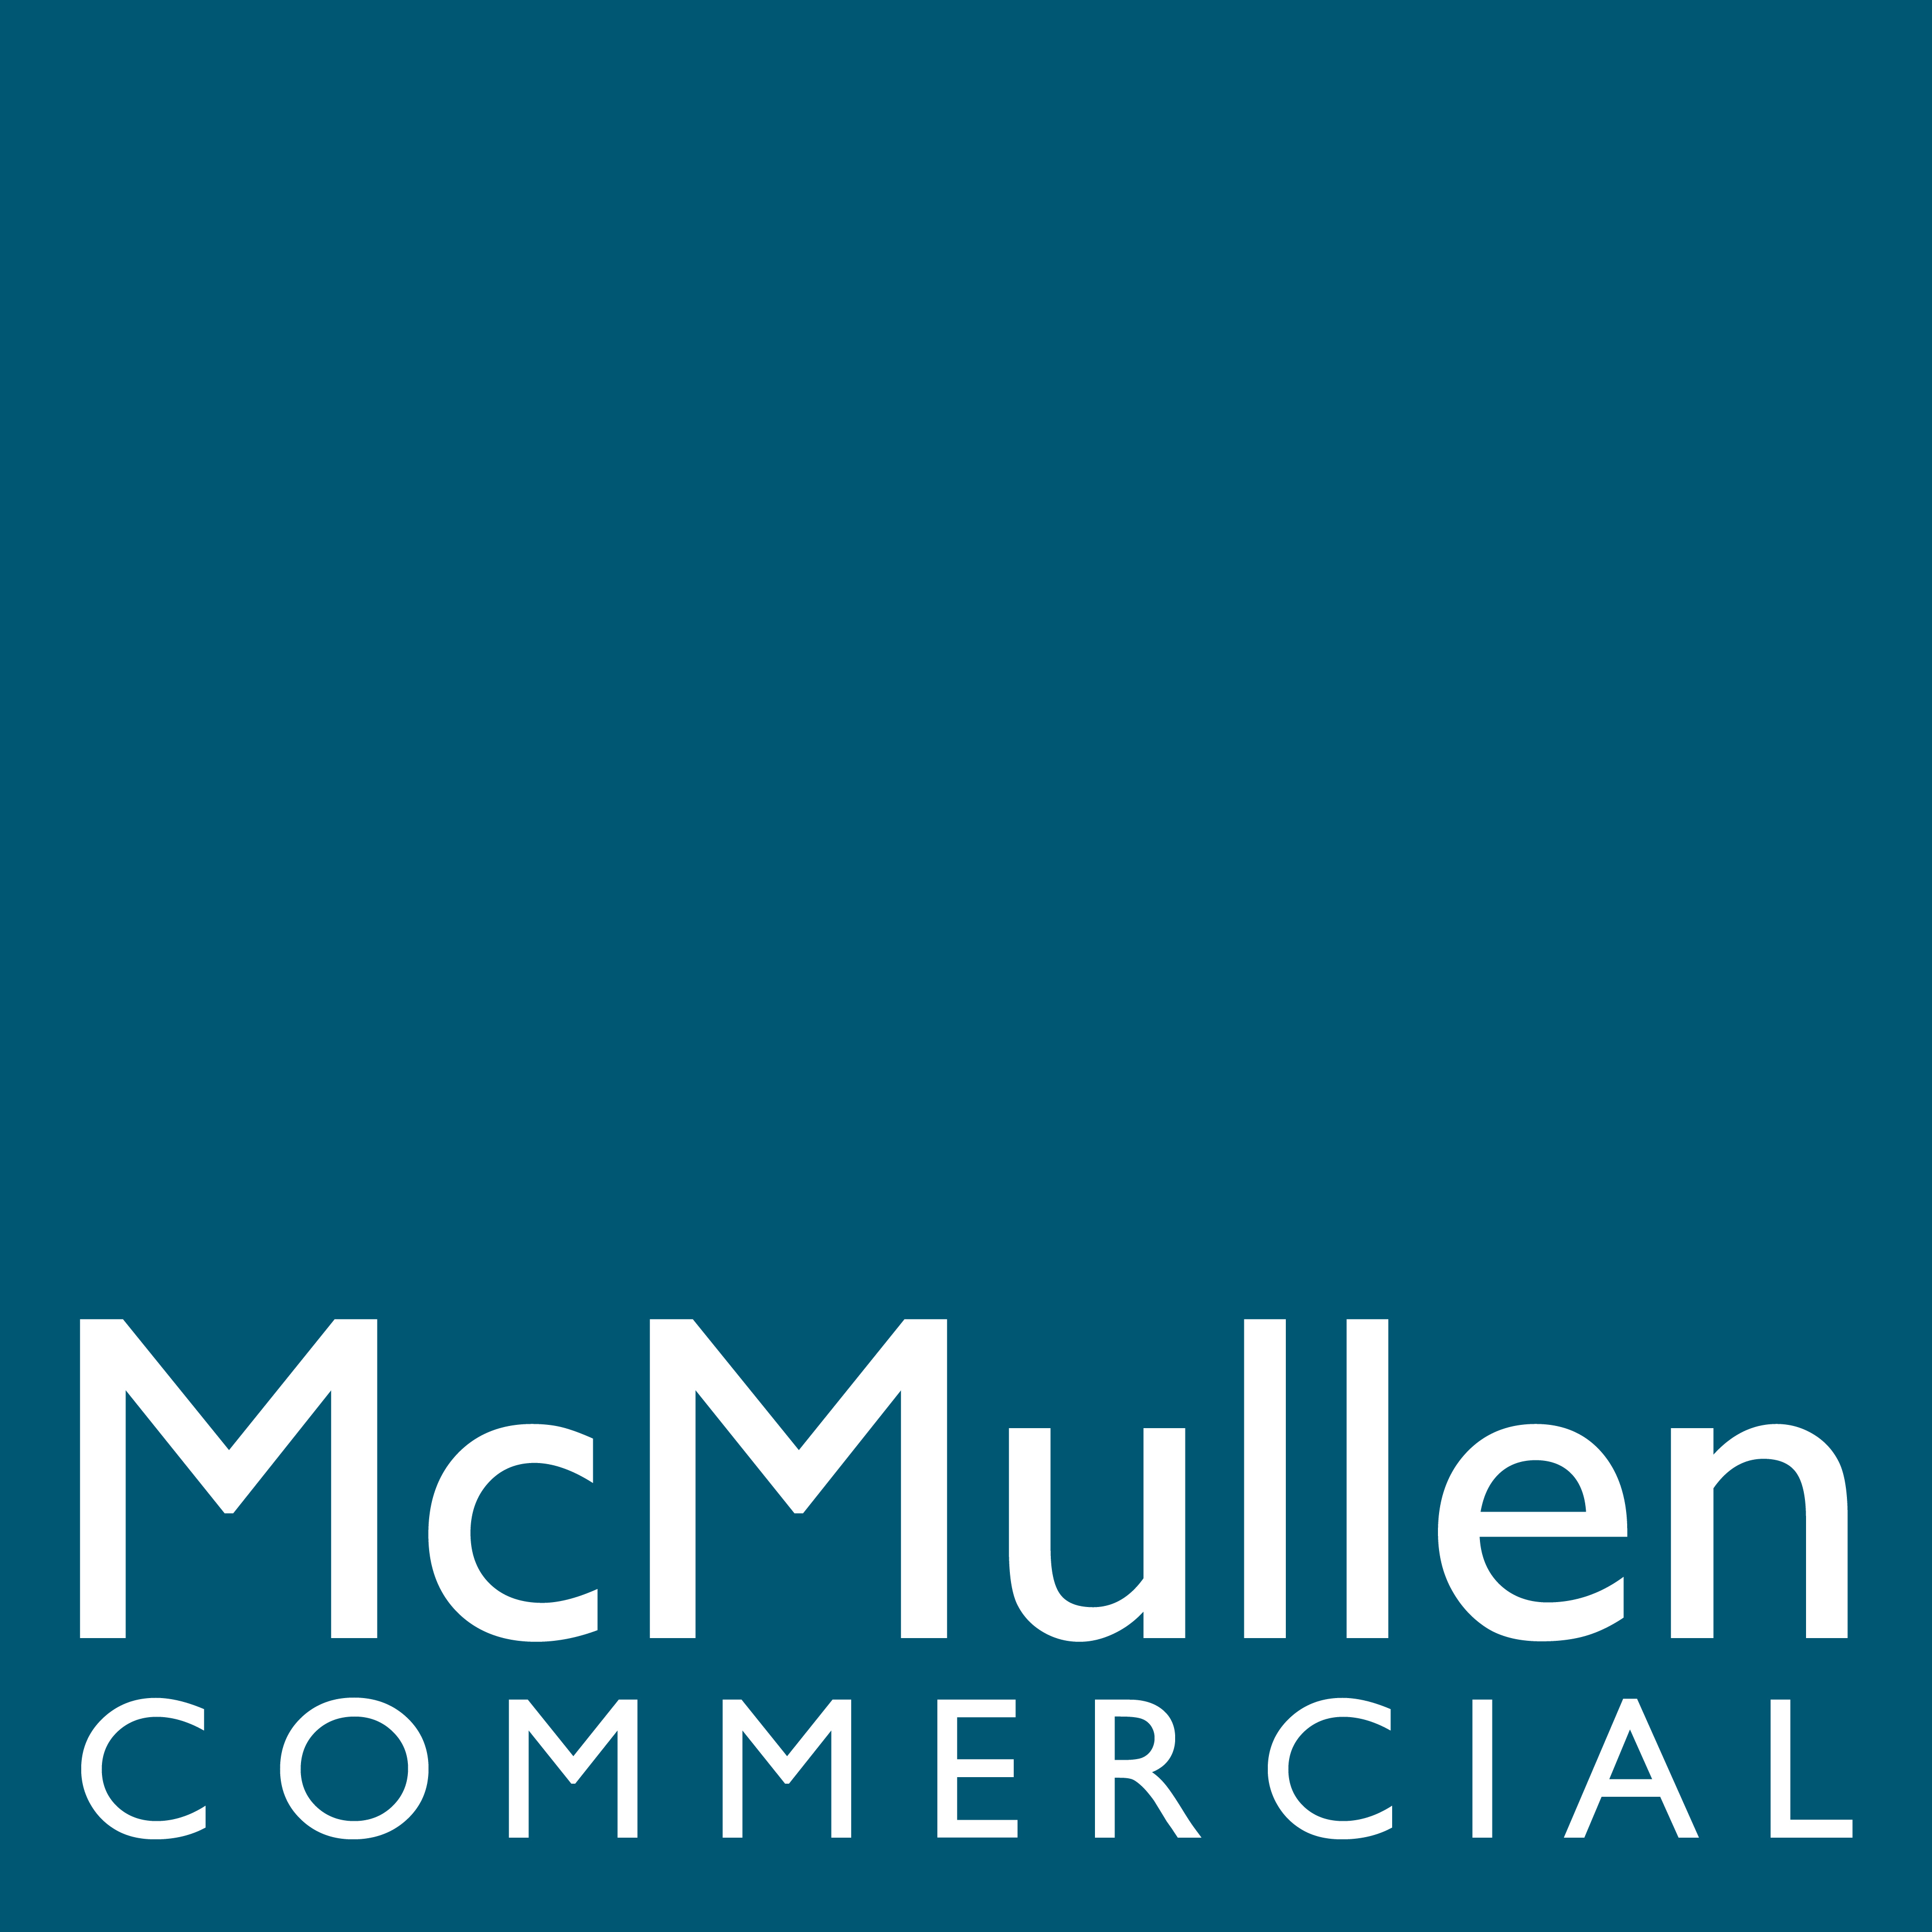 3810+ Mcmullin property management ideas in 2021 